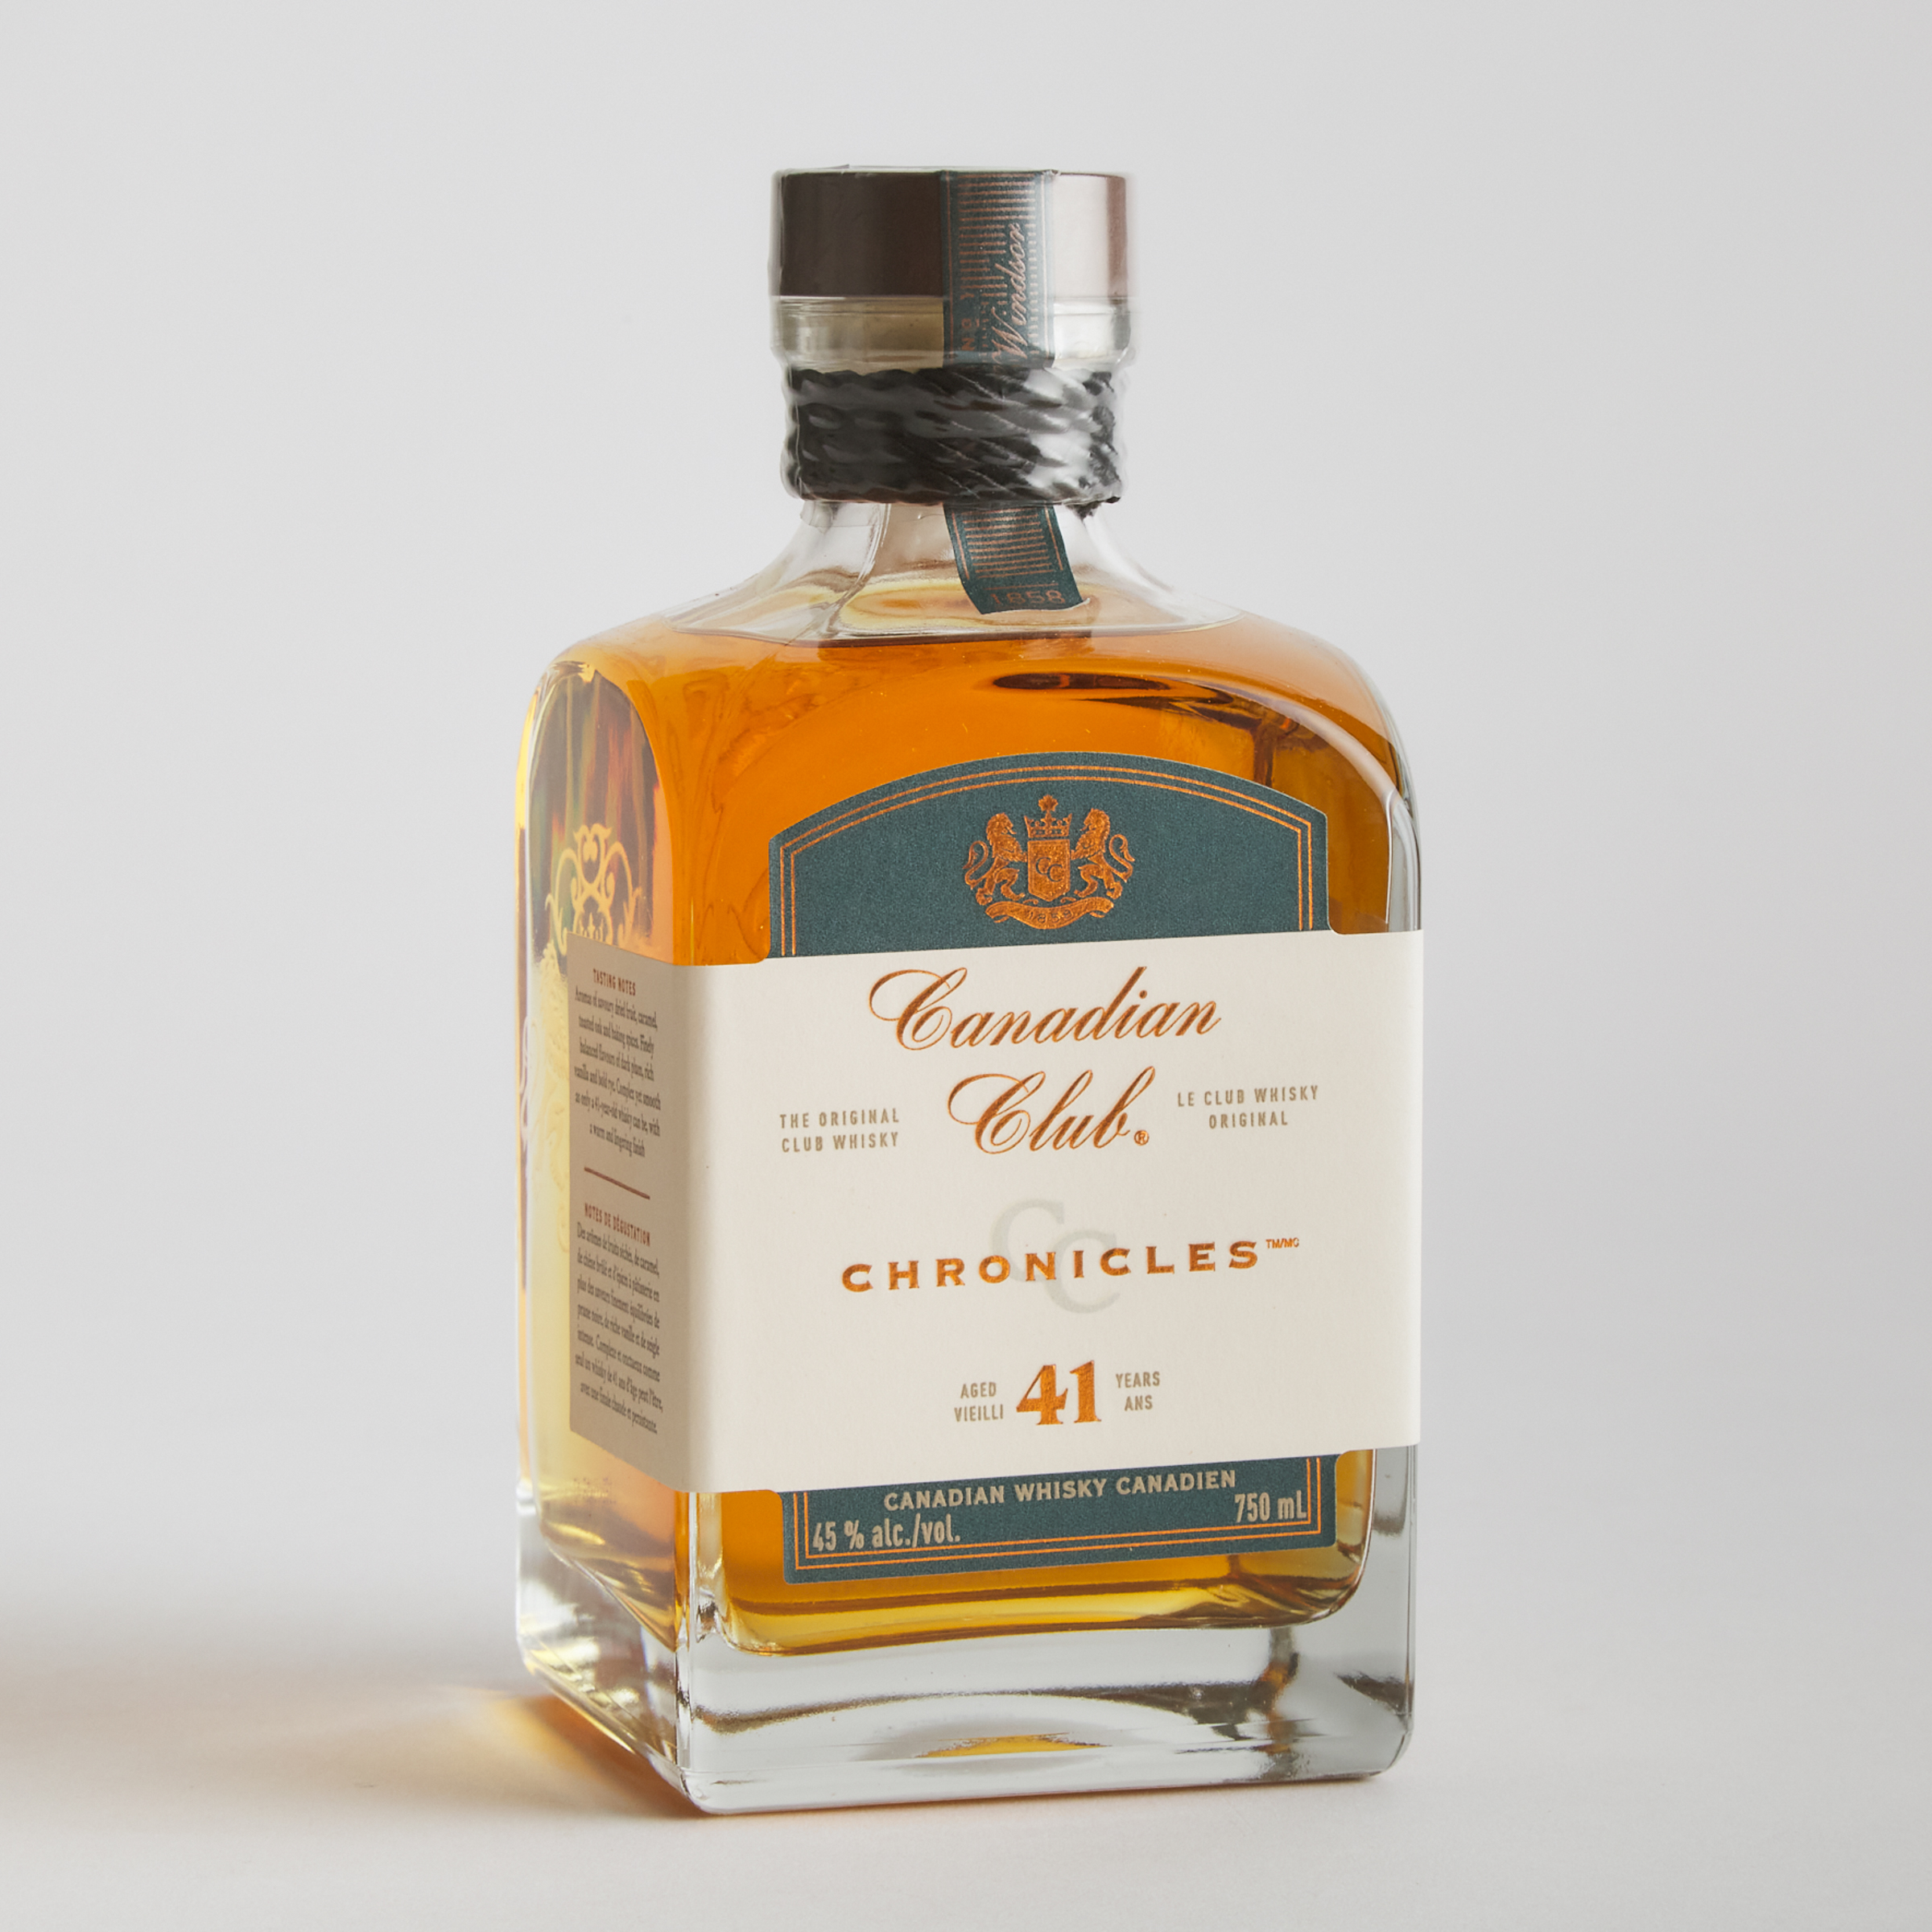 CANADIAN CLUB CANADIAN WHISKY 41 YEARS (ONE 750 ML)